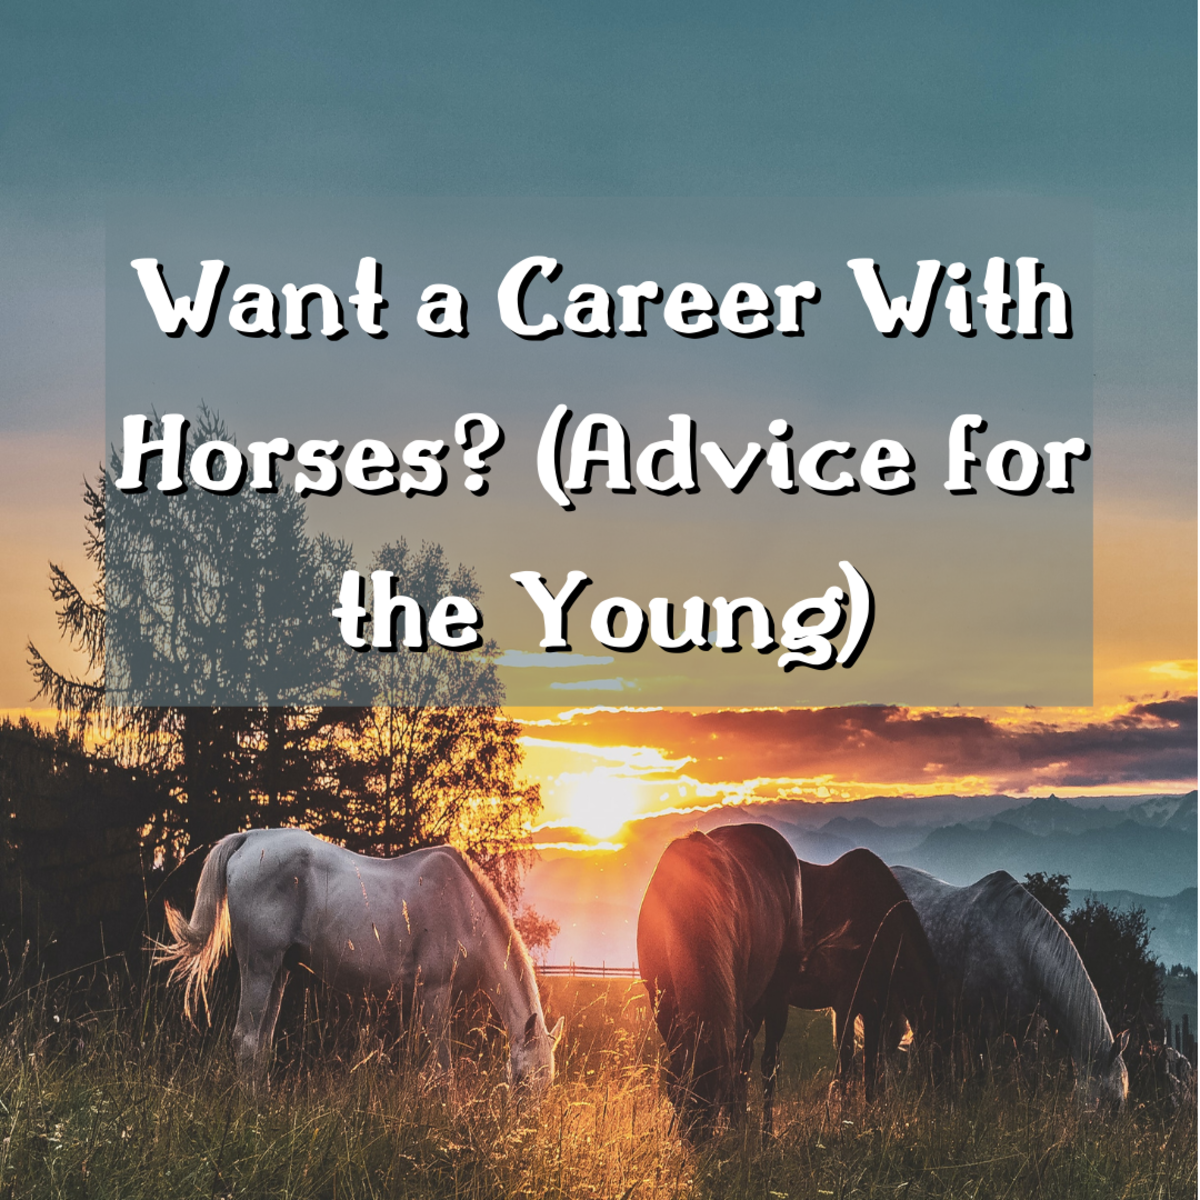 Do you want a career in the horse industry? Read on to find important advice on pursuing a career with horses.